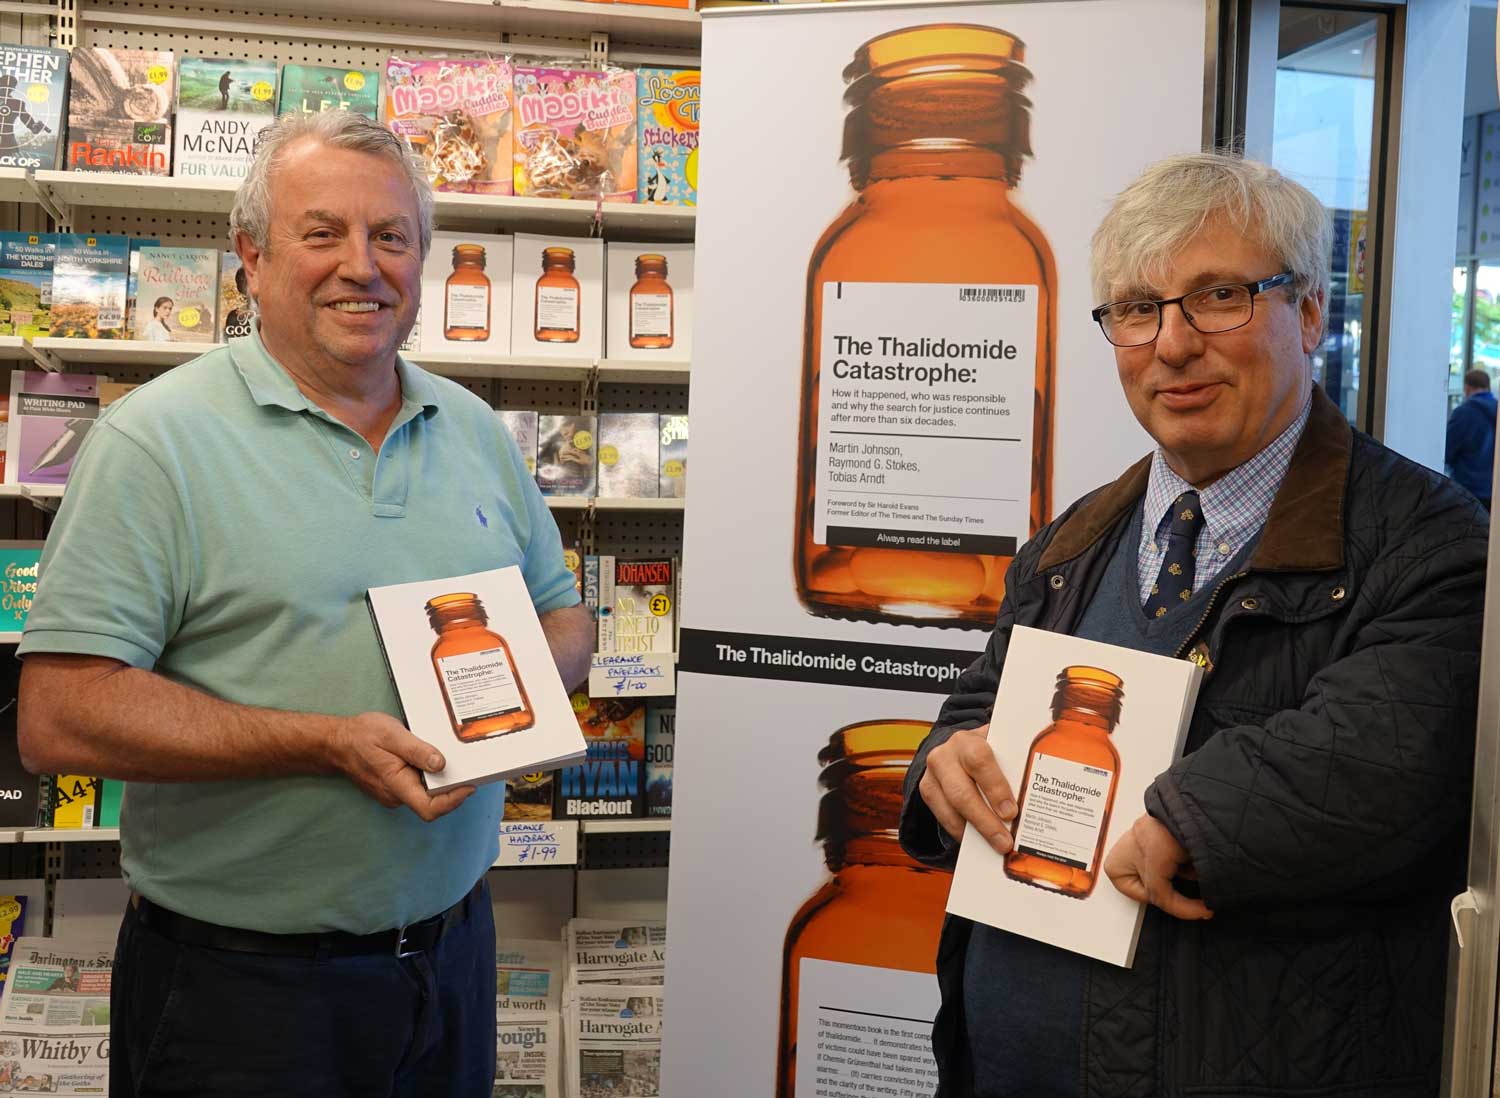 Bookstall owner, Brian Moses, left, with thalidomide campaigner Guy Tweedy and copies of the new book - The Thalidomide Catastrophe